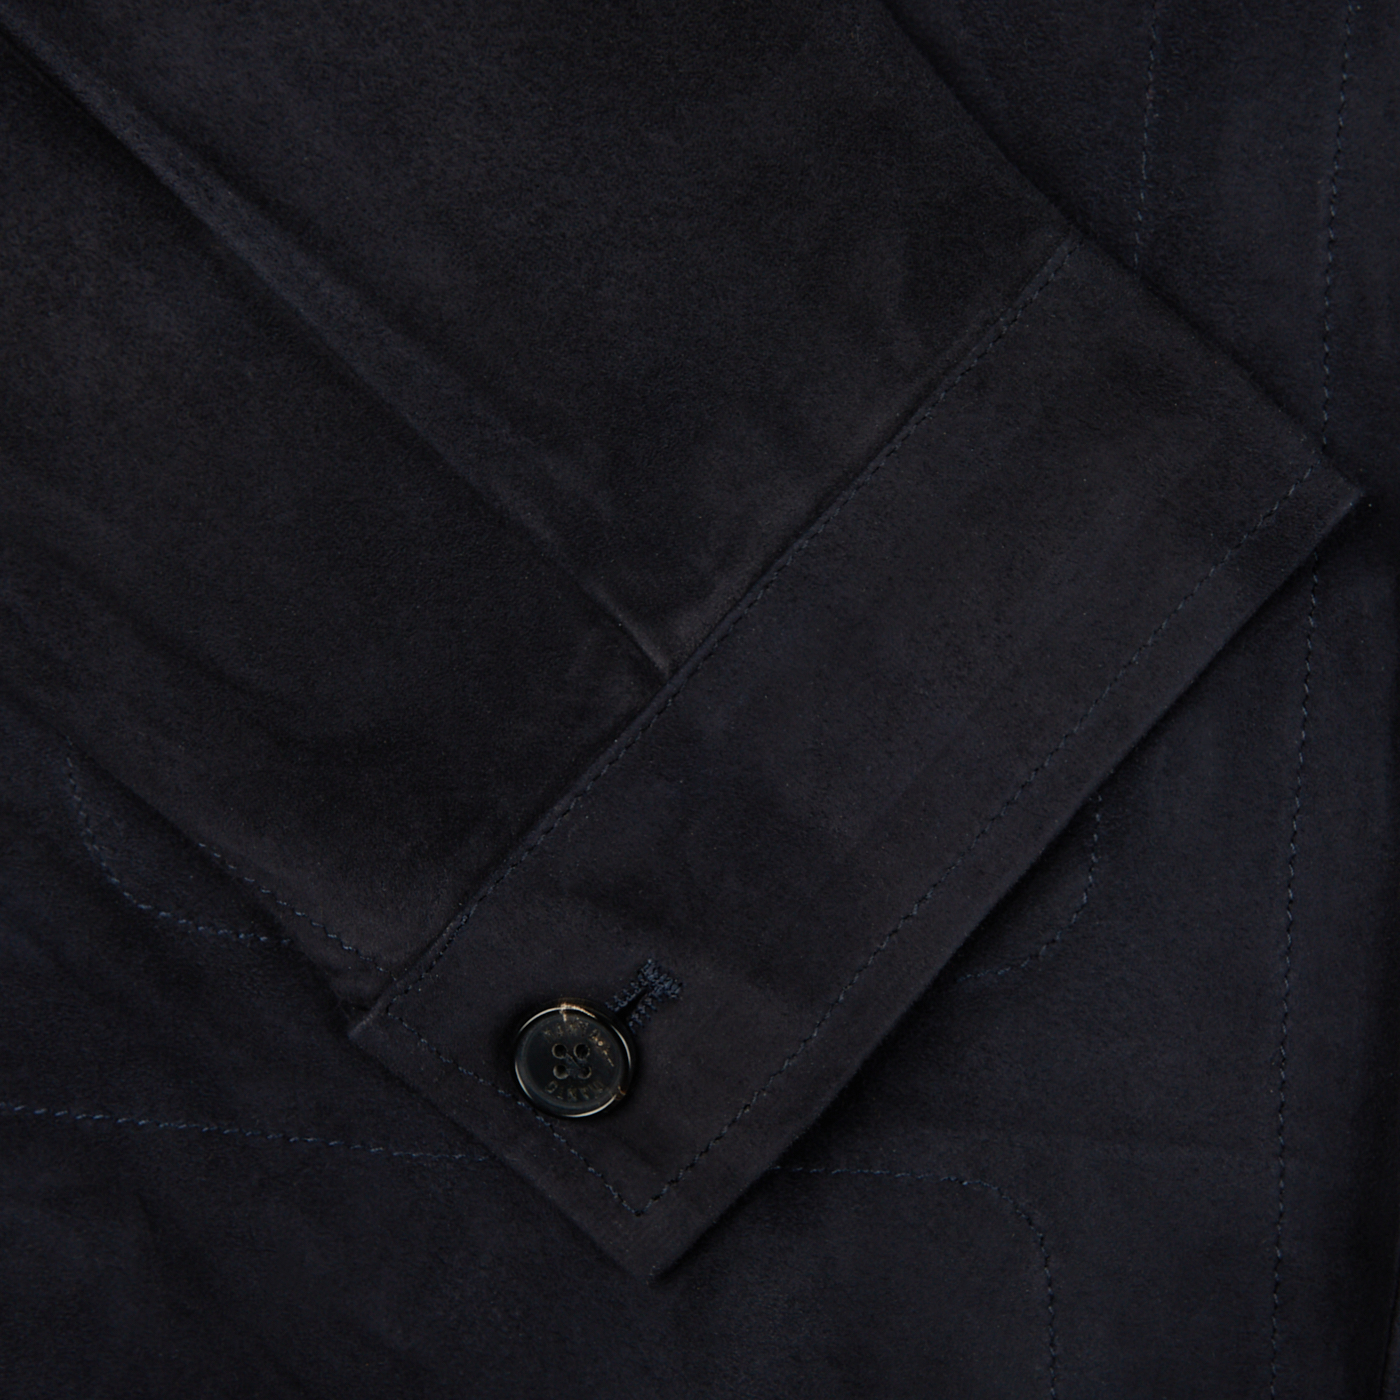 A close up image of a Manto Navy Blue Suede Leather Overshirt.